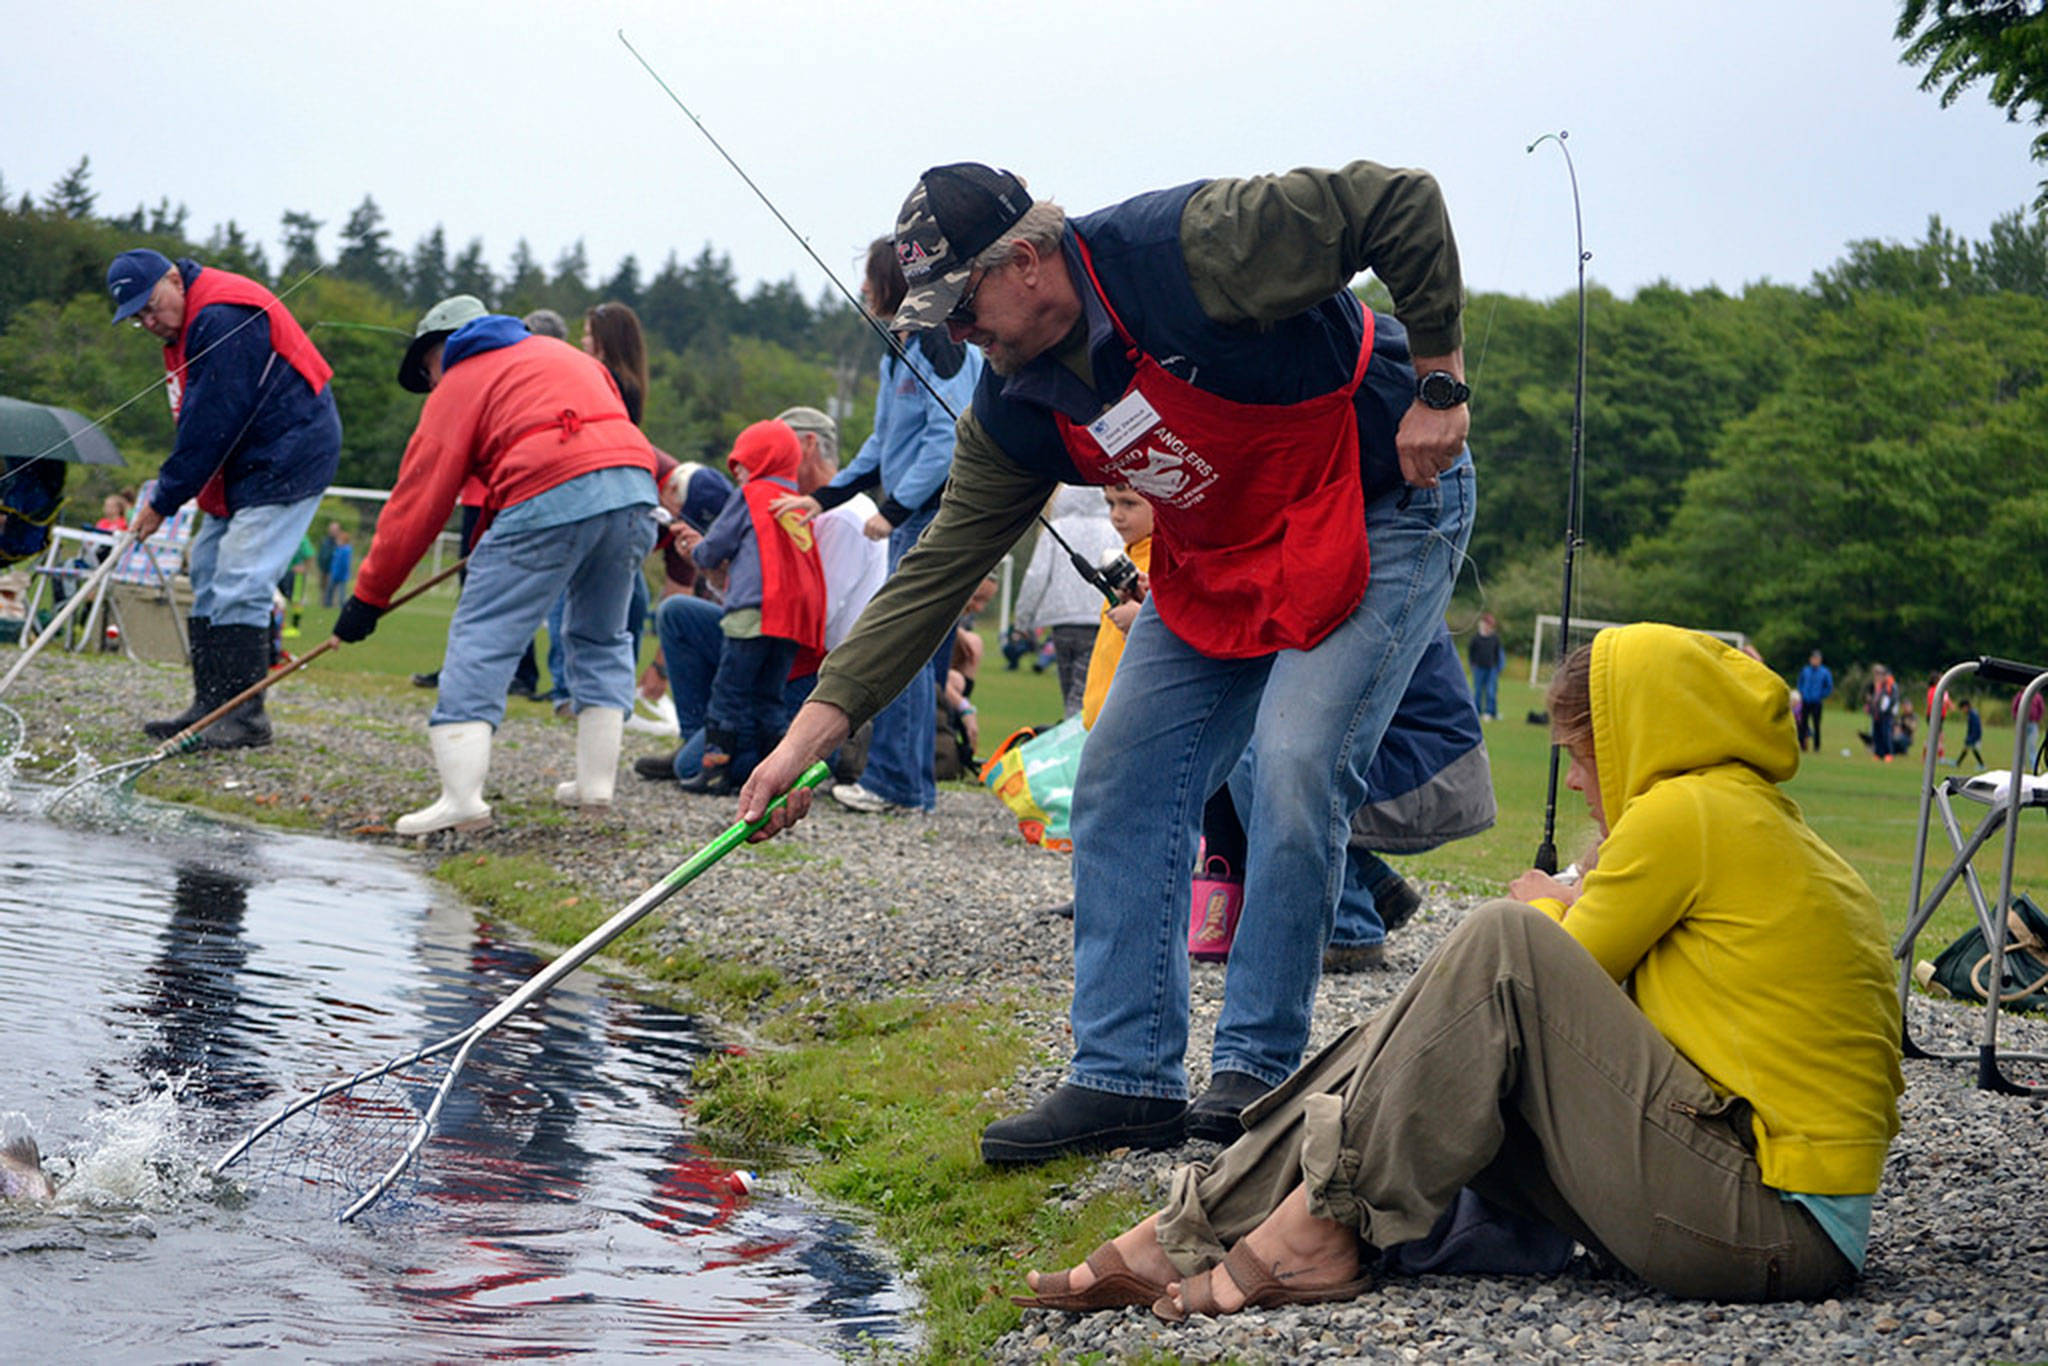 Jamie and Gibson Hill of Sequim pull in a fish while Dave Dewald tries to net it at Kids Fishing Day in 2016. Organizers of the event plan to hold it May 19, 2018, but they hope to move the event to another pond in 2019 to preserve the fish in hot weather. Matthew Nash/Olympic Peninsula News Group